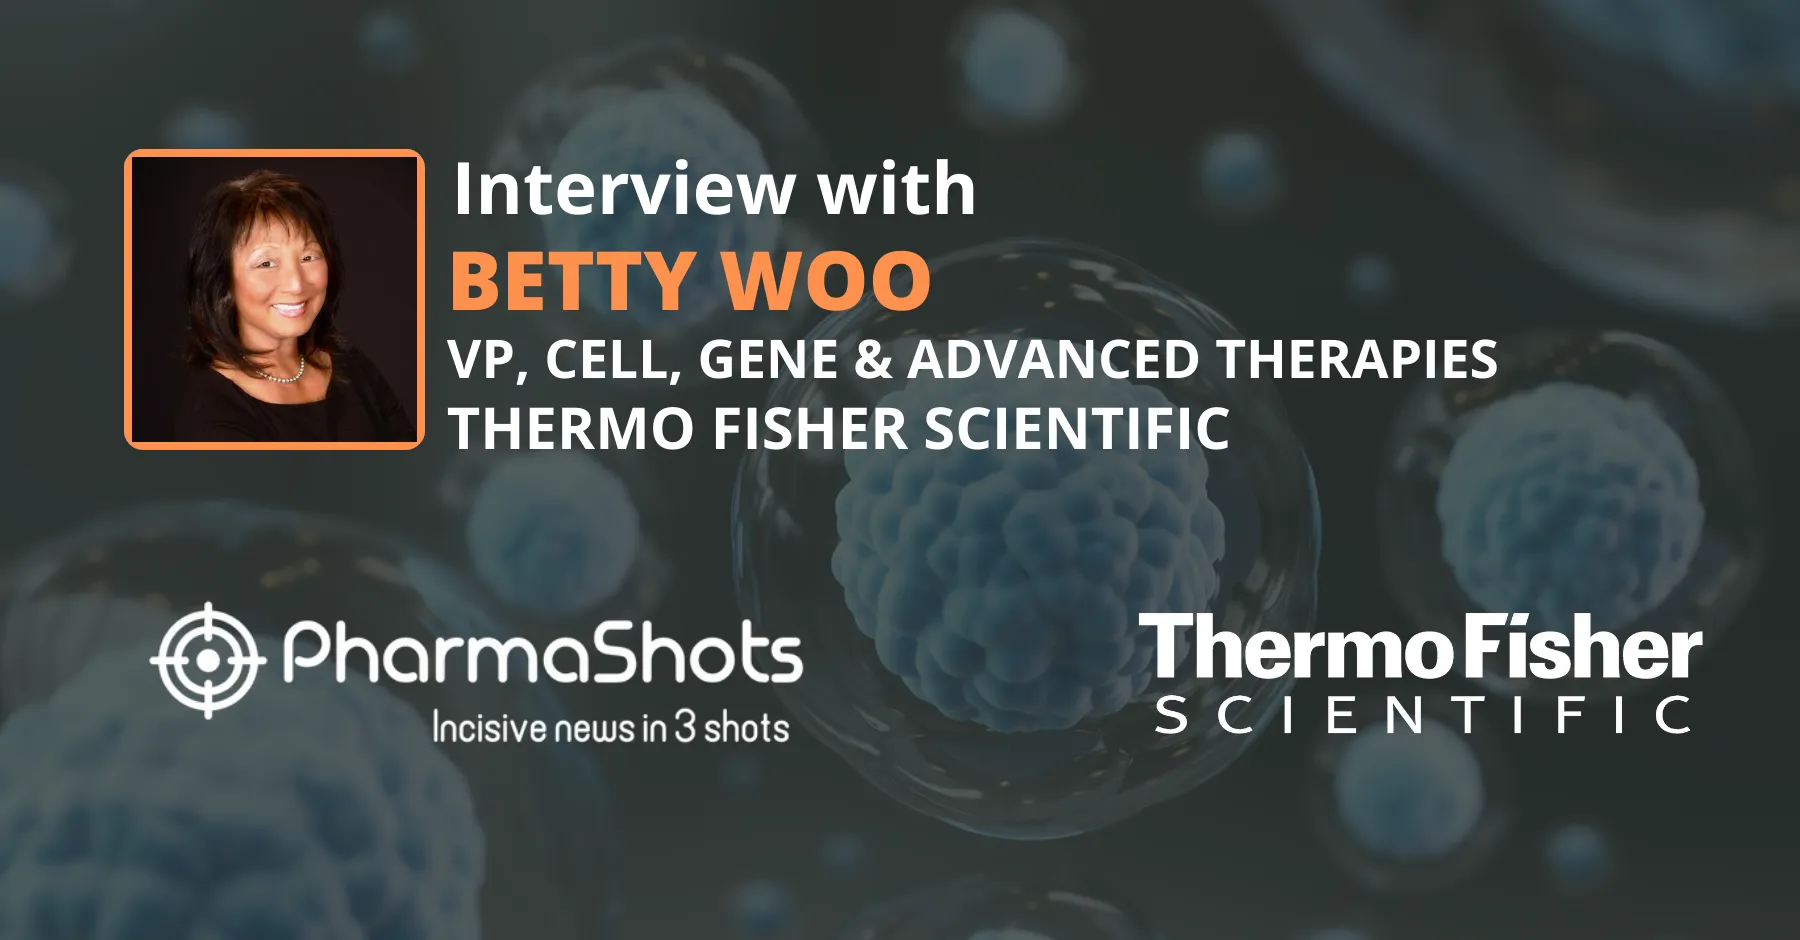 In an Insightful Conversation with PharmaShots, Betty Woo Highlights Thermo Fisher's Cell Therapy Collaboration Program